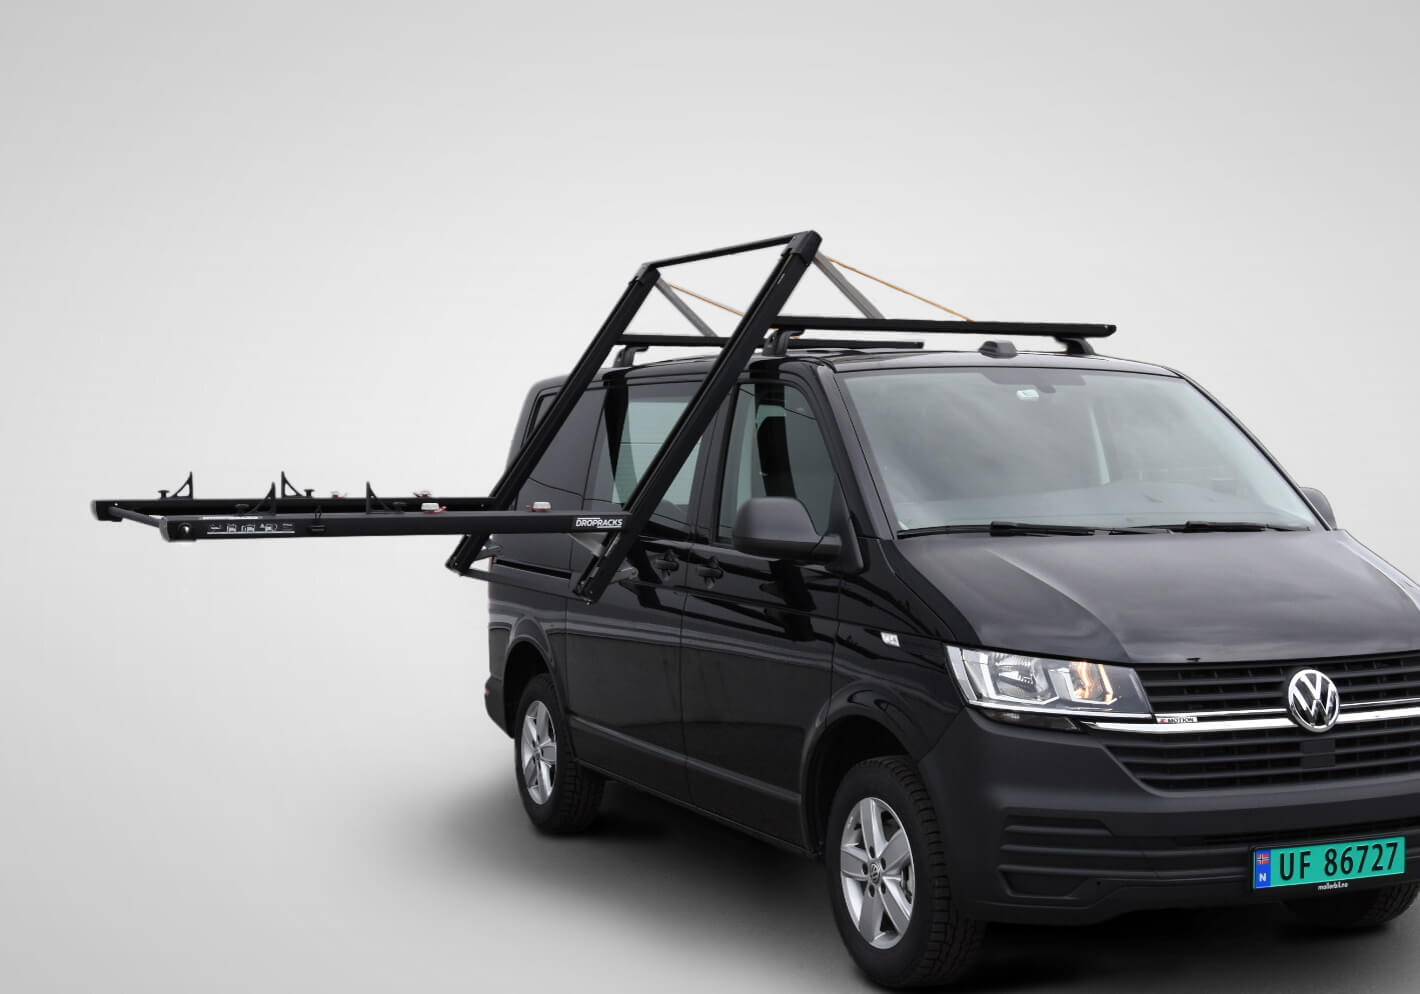 Volkswagen VW T6 Transporter L2 (LWB) H1 (low roof) (2015 onwards):Dropracks XL roof loading system (vehicle roof connectors at extra cost)